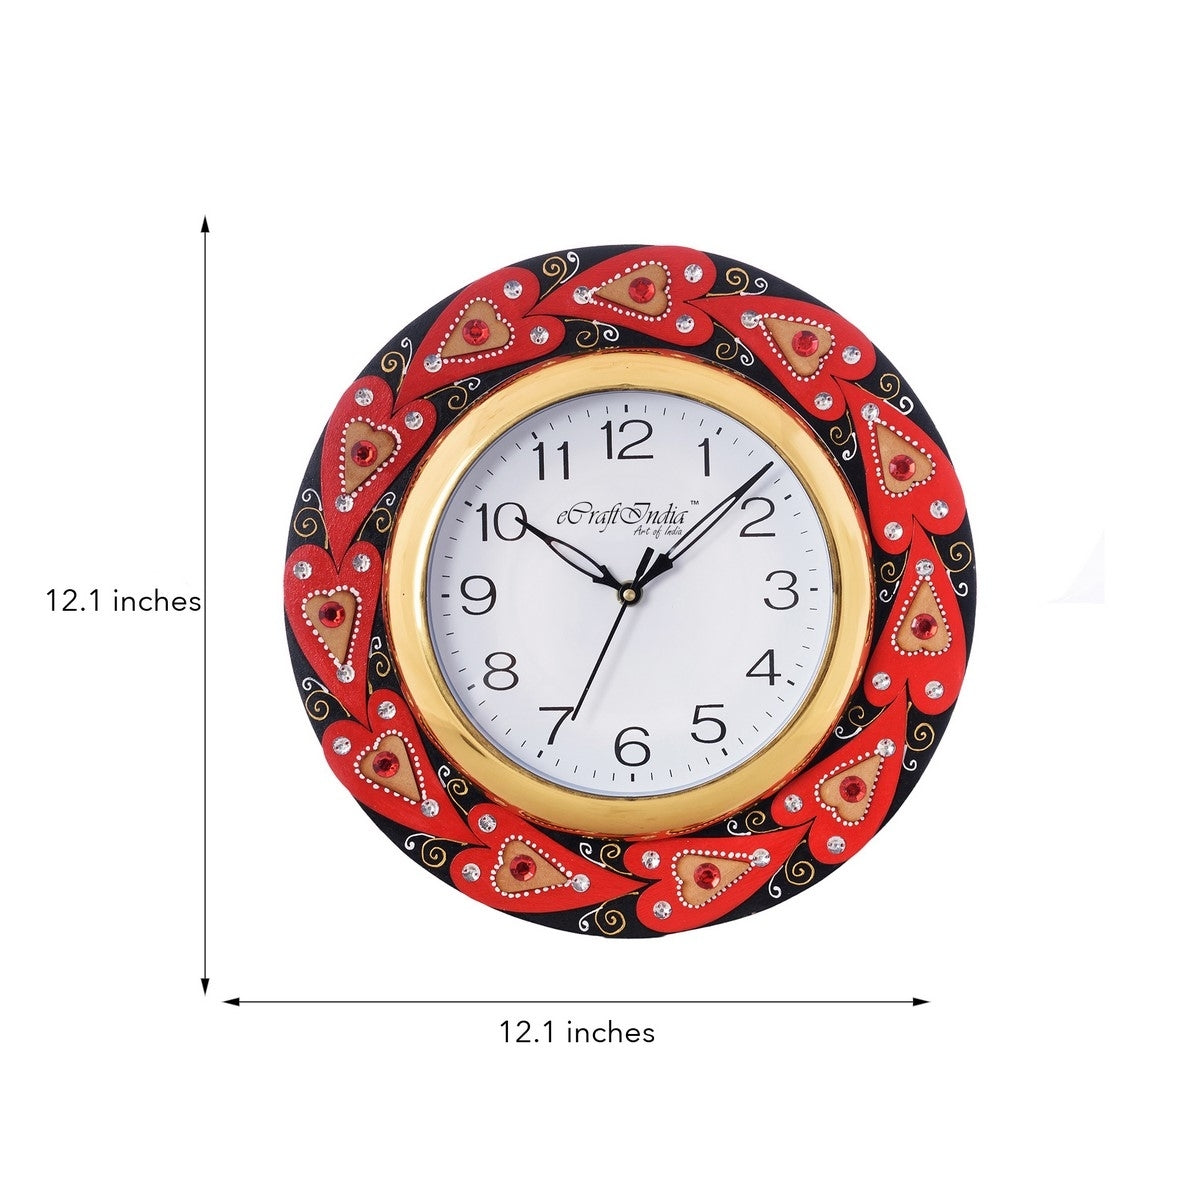 Creative Crystal studded Red Hearts Wooden Handcrafted Wall Clock 2